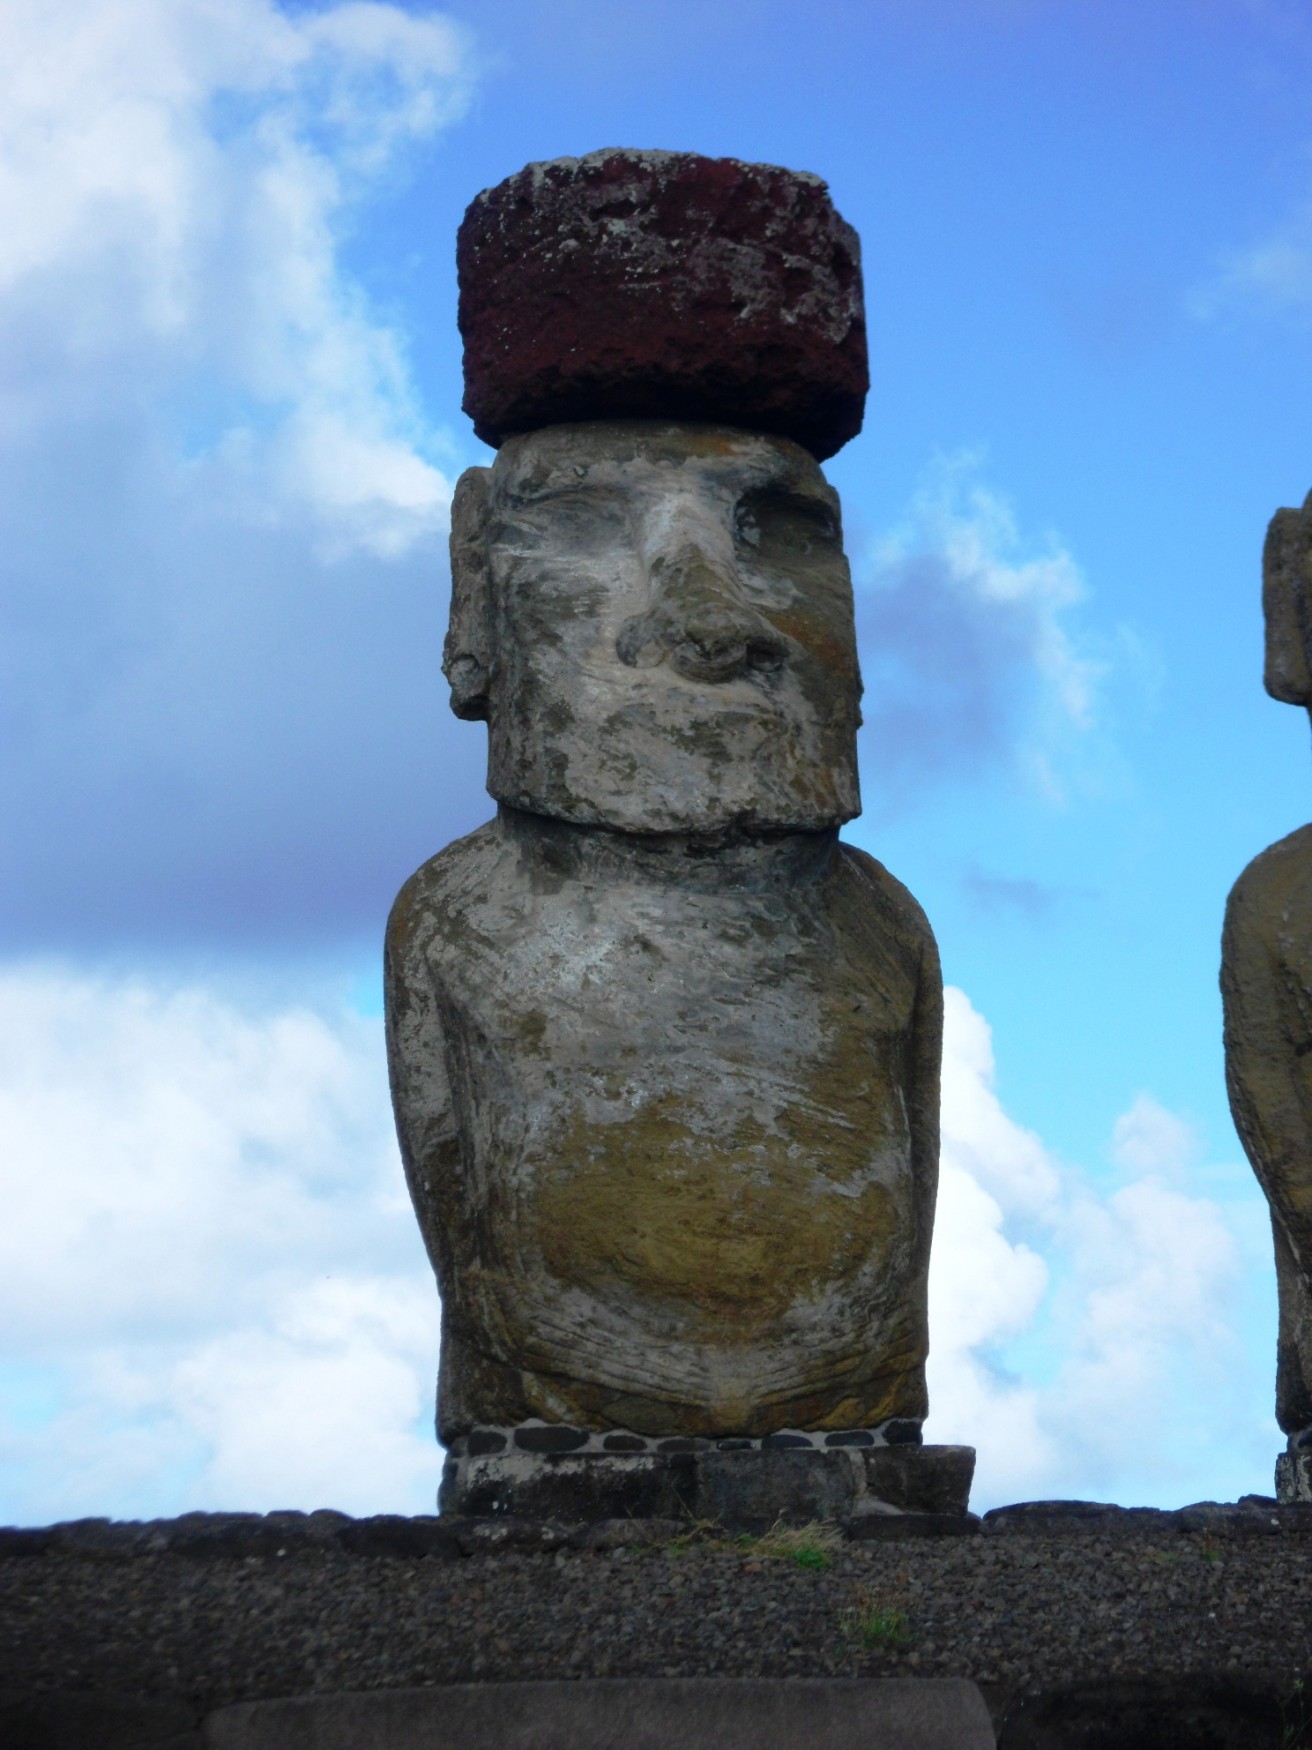 a stone statues with a stone head on top